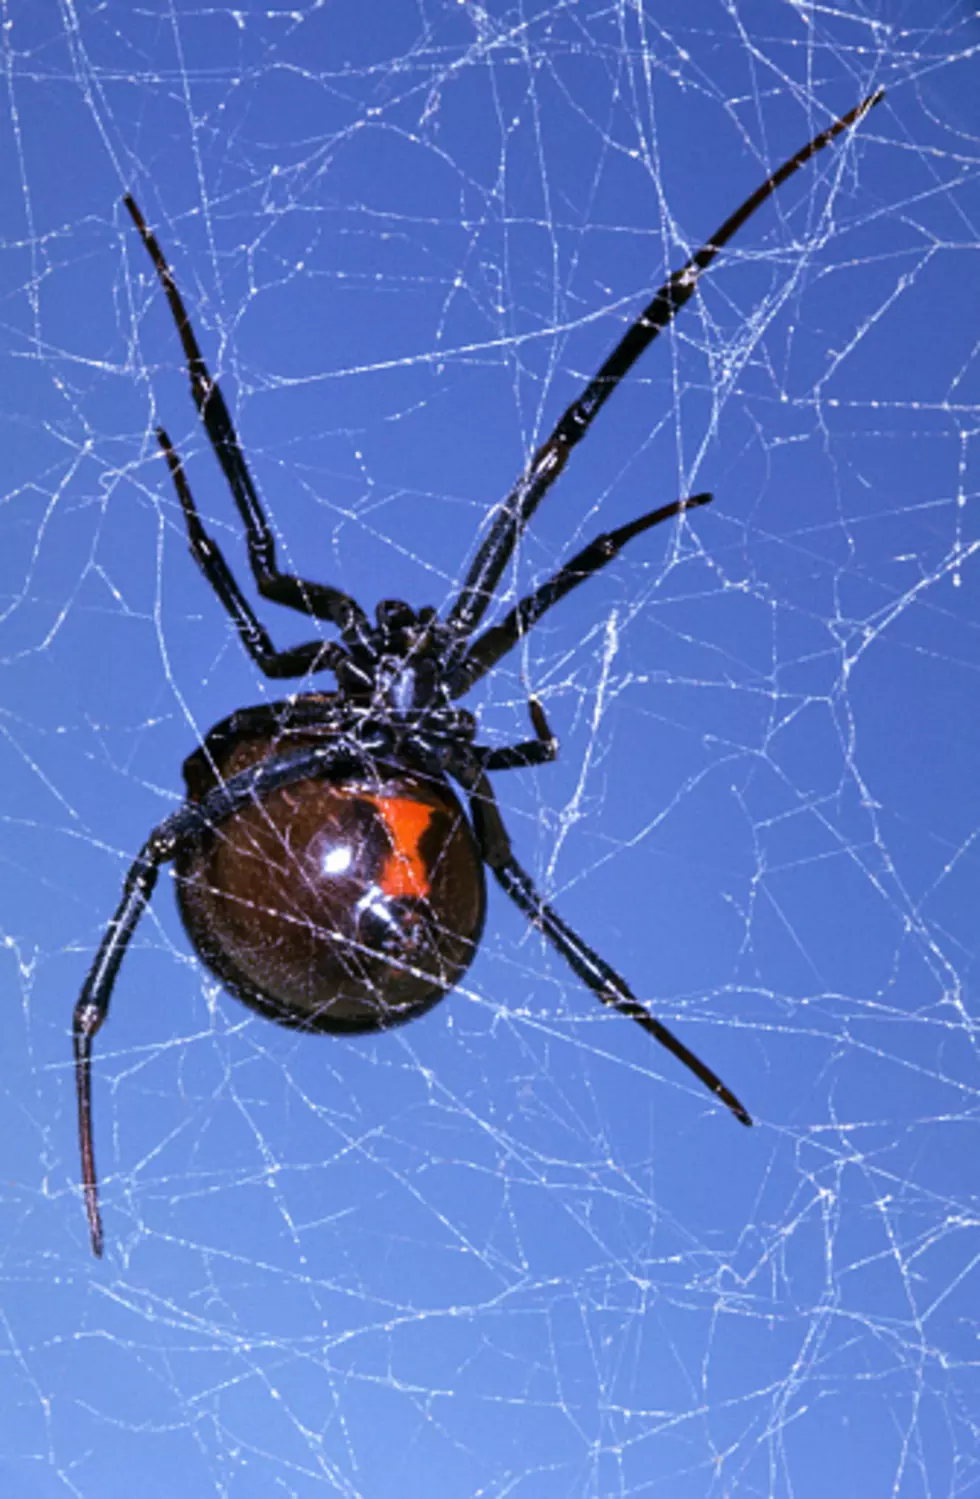 It's Bug Season Again, So Let's Look at Illinois' Most Poisonous Creepy-Crawlies